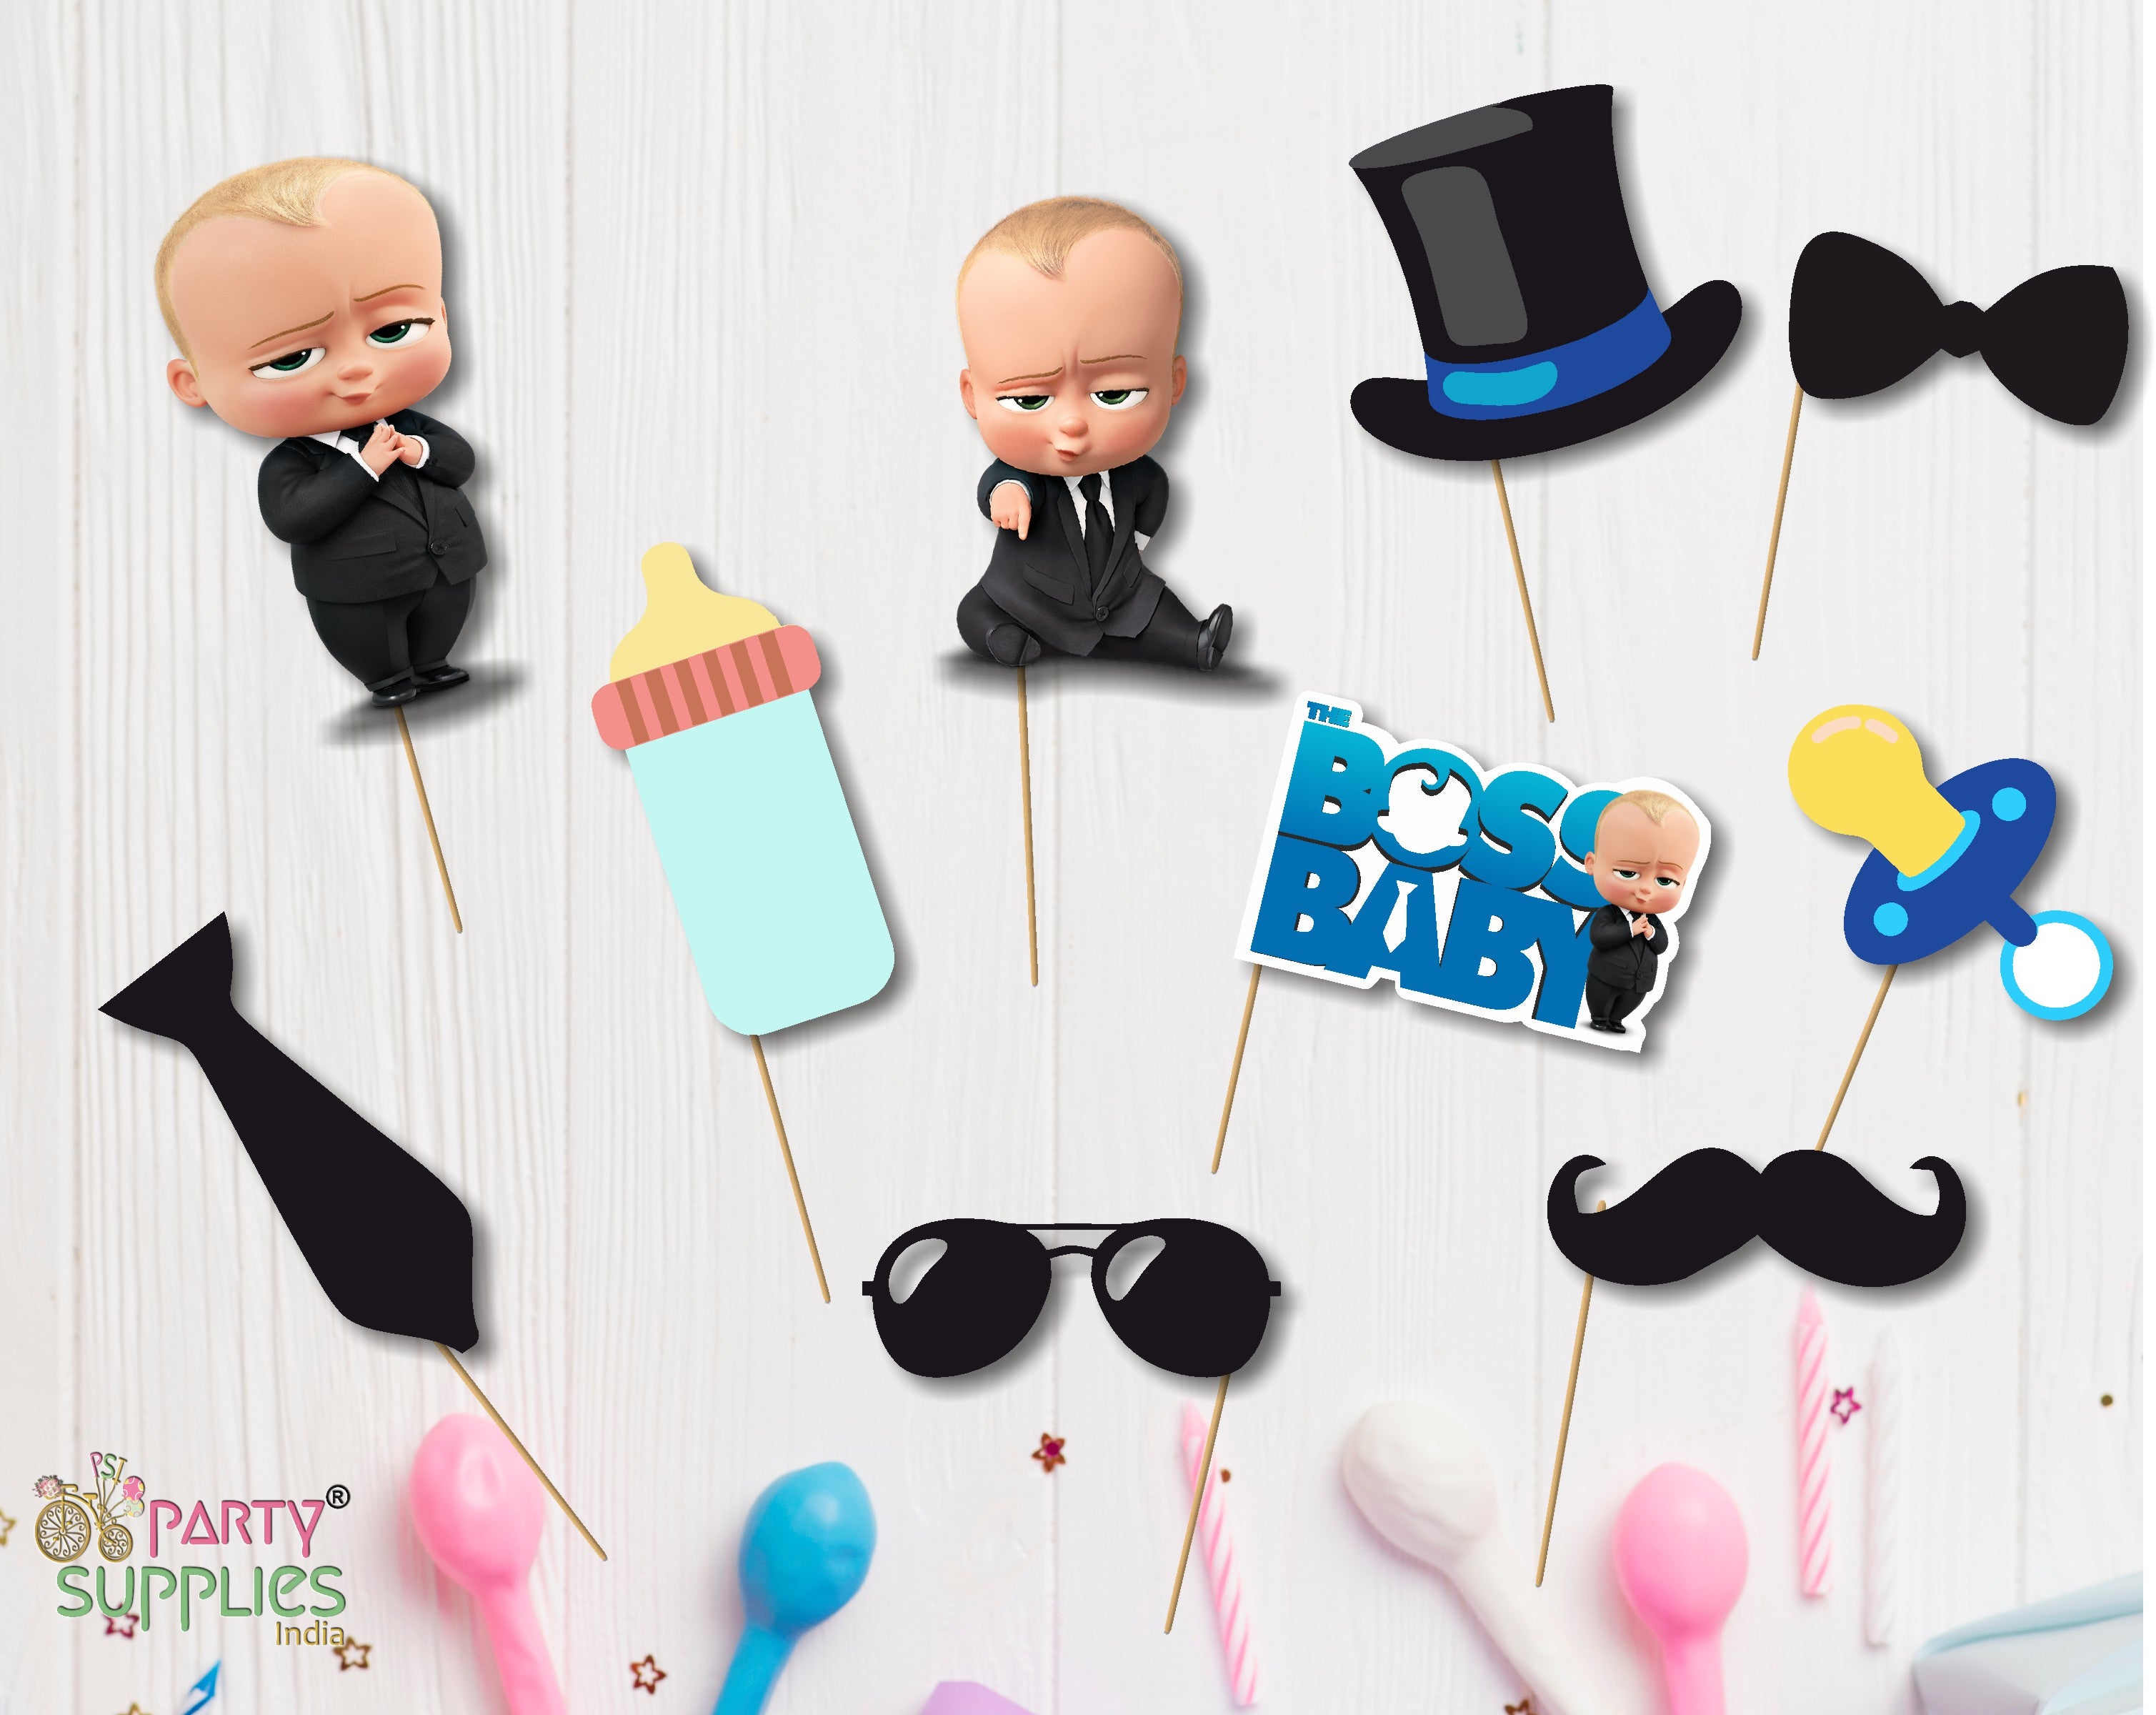 PSI Boss Baby Theme Props